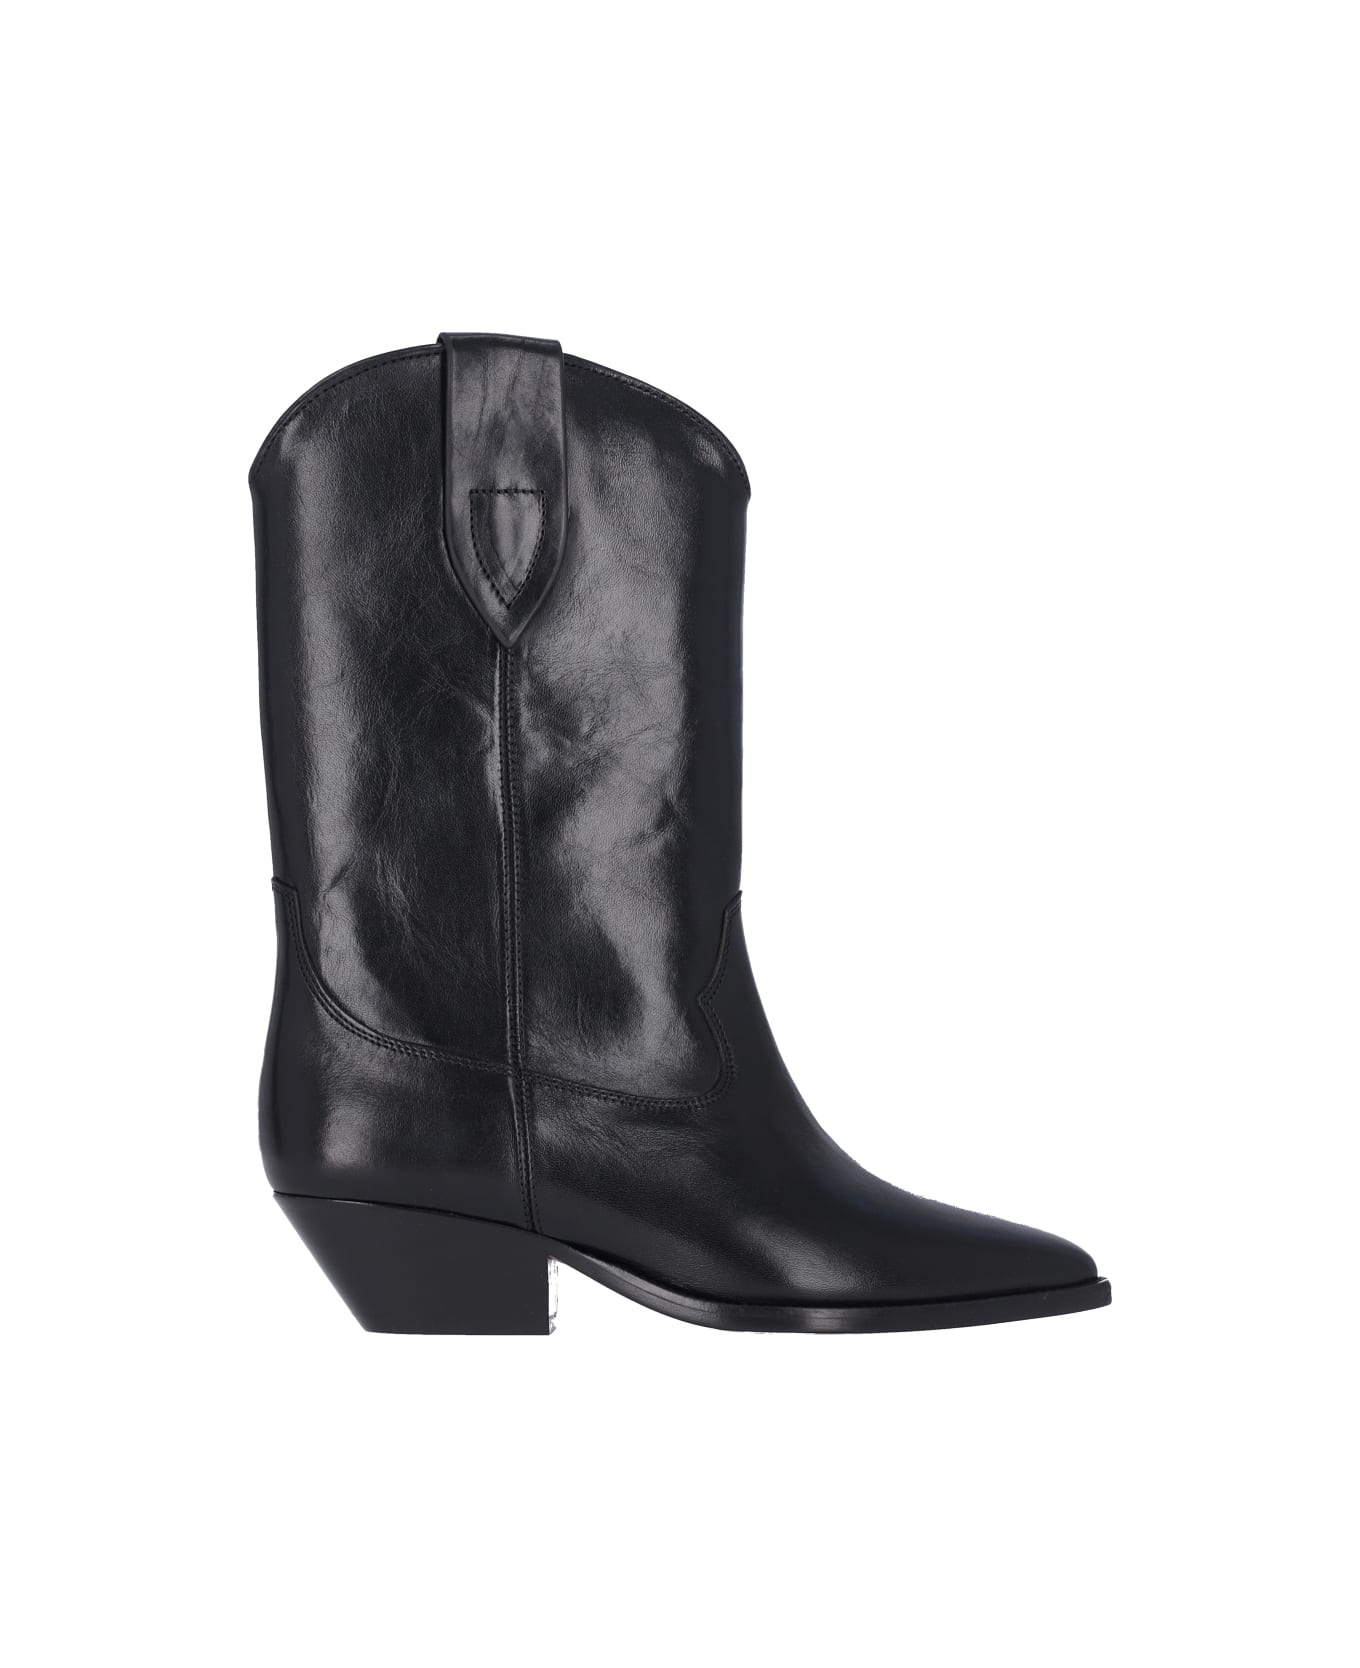 Isabel Marant Pointed Toe Block Heeled Ankle Boots - Black